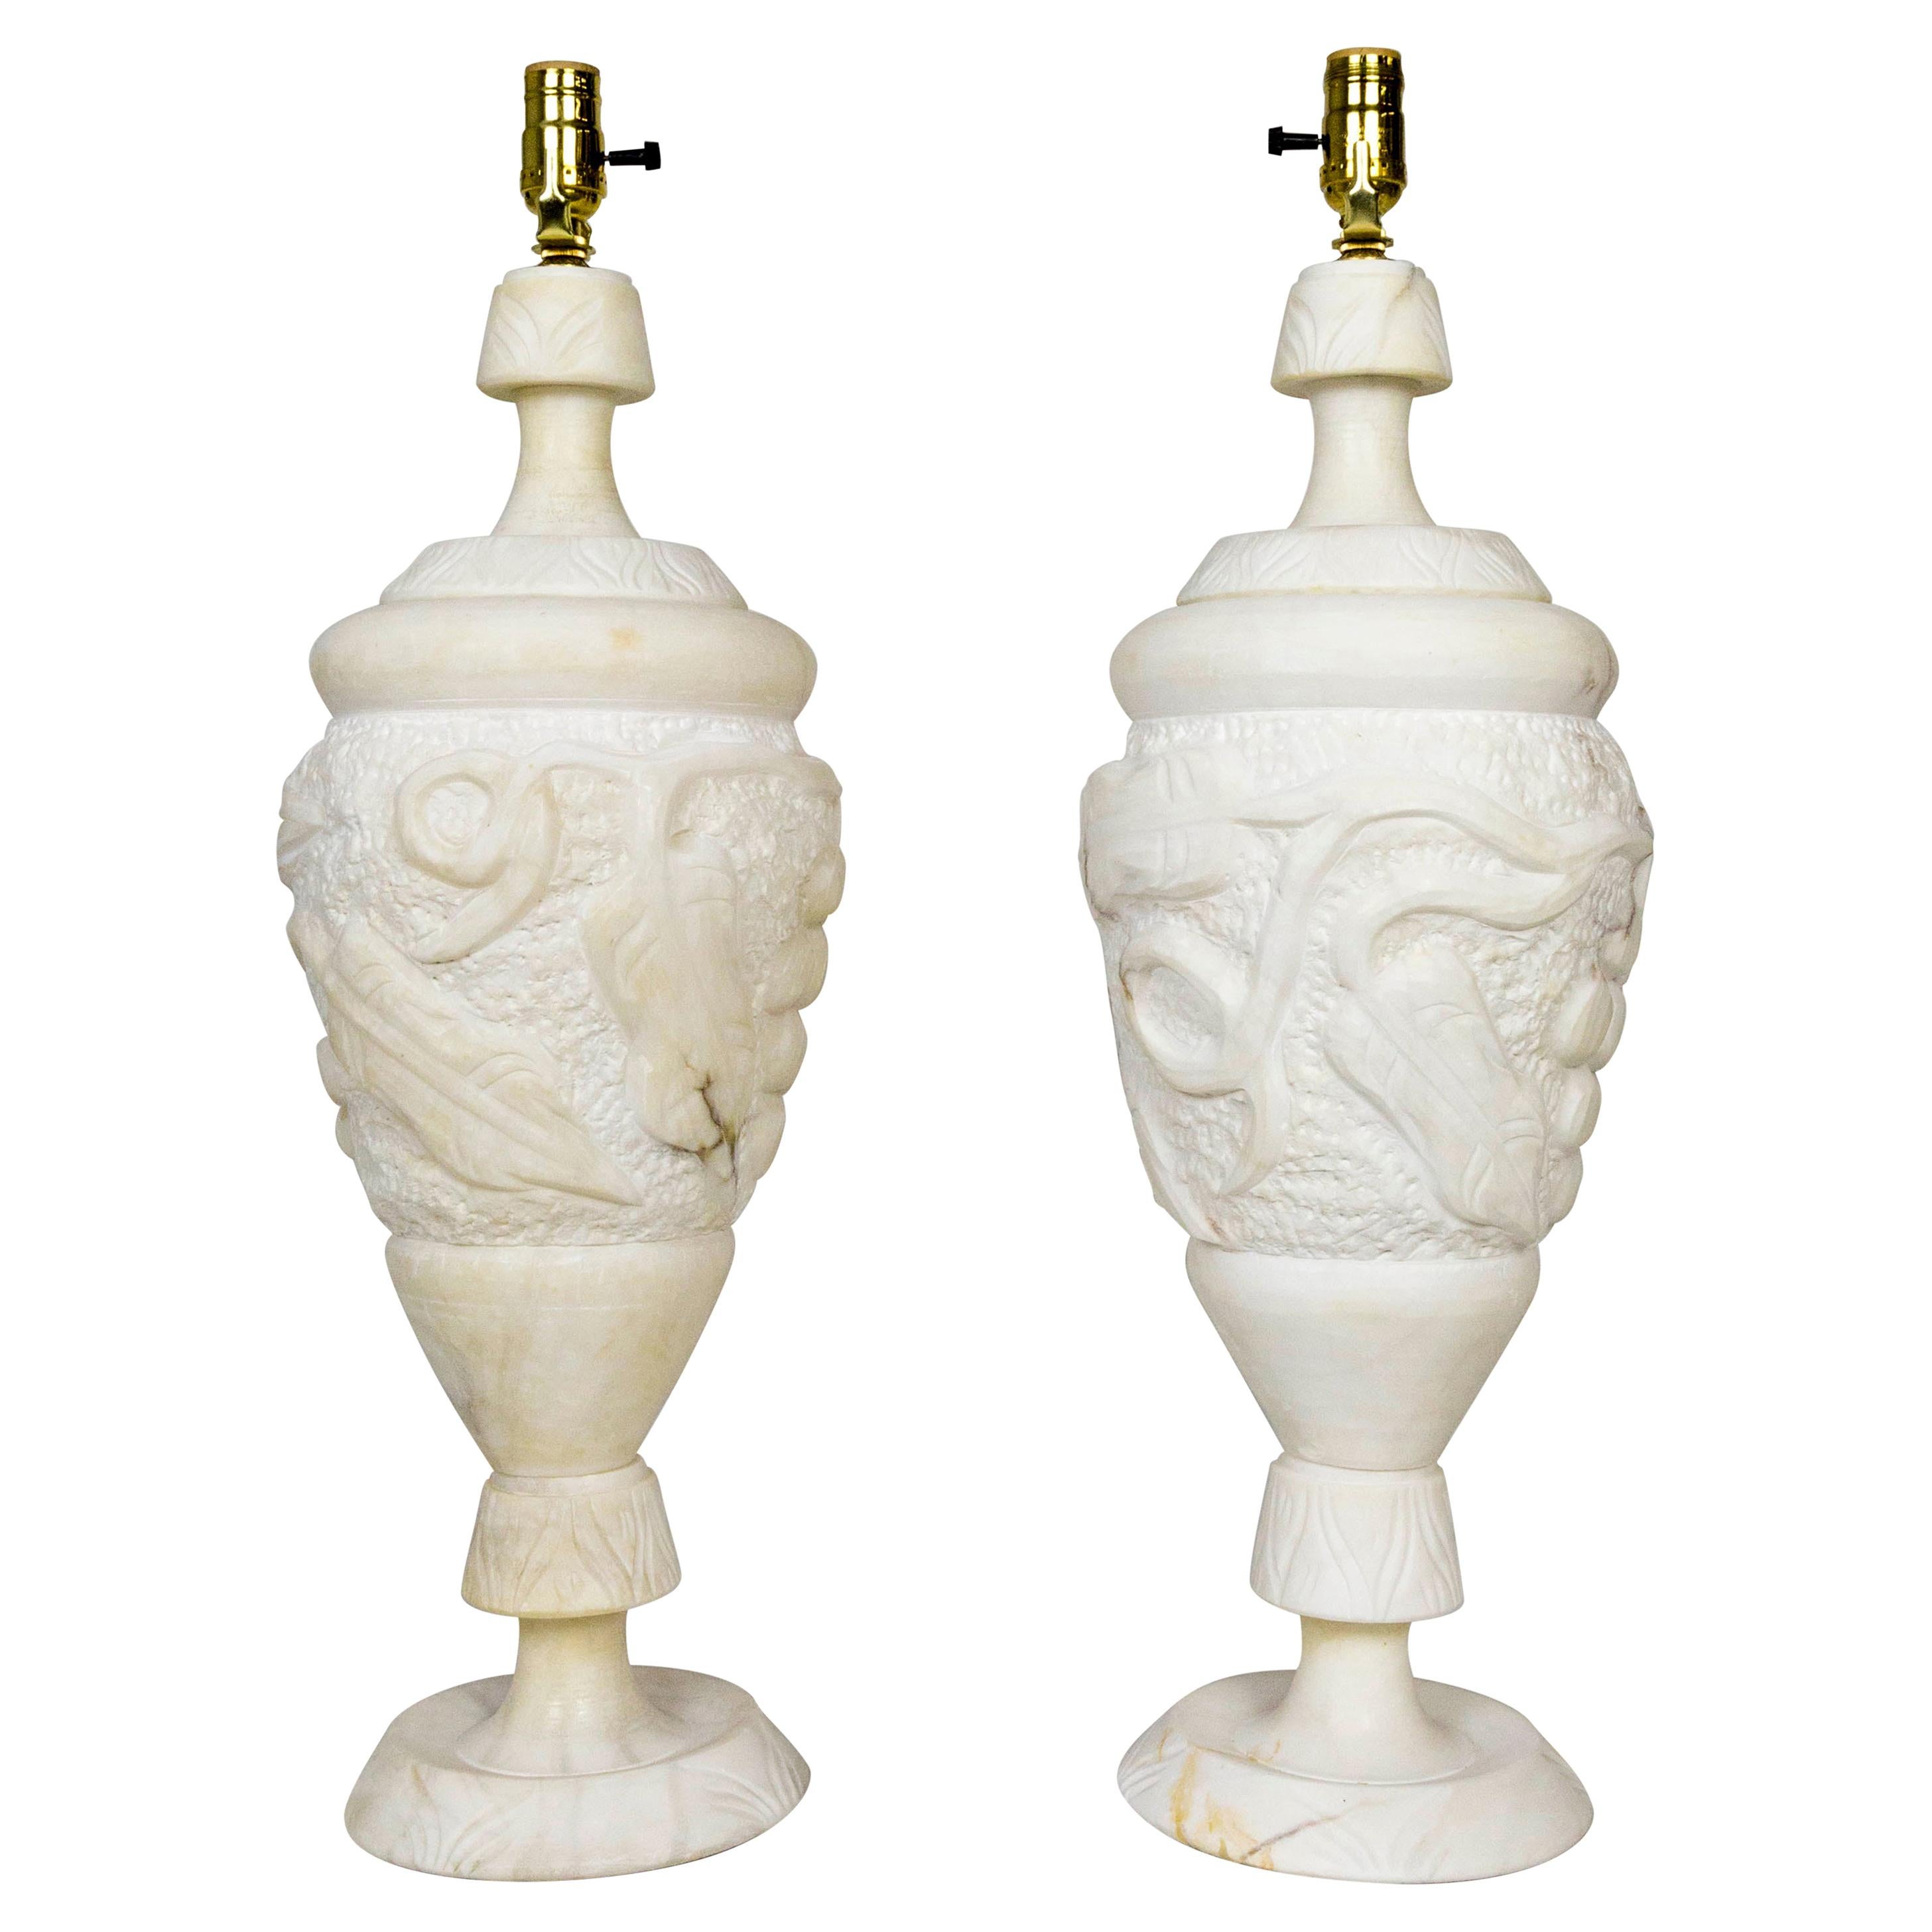 Italian Hand Carved Grapevine Alabaster Urn Lamps with Interior Light, 'Pair'